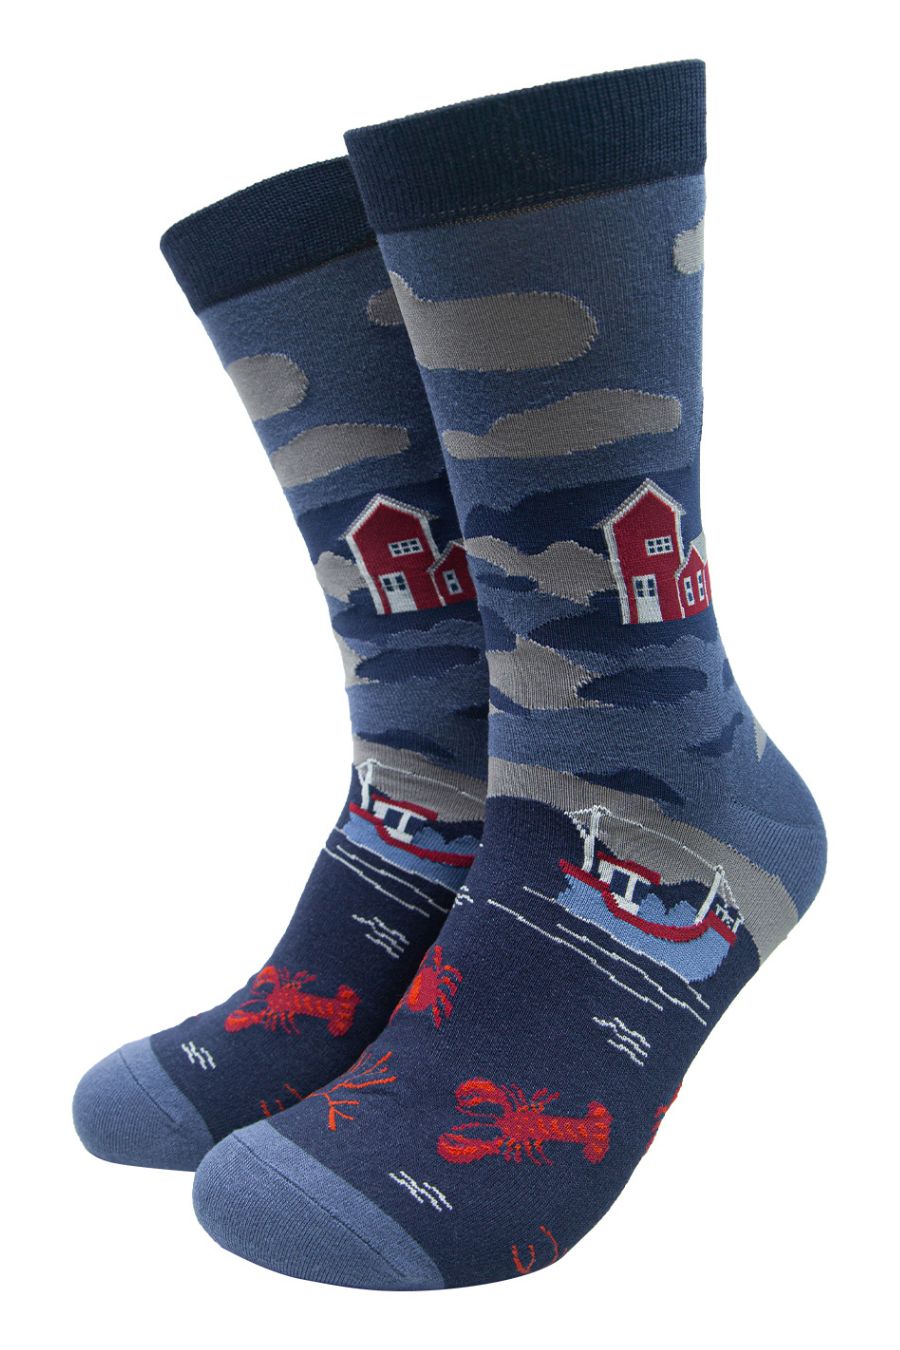 blue dress socks designed to look like a seaside scene with fishing boats, shoreline and lobsters in the water